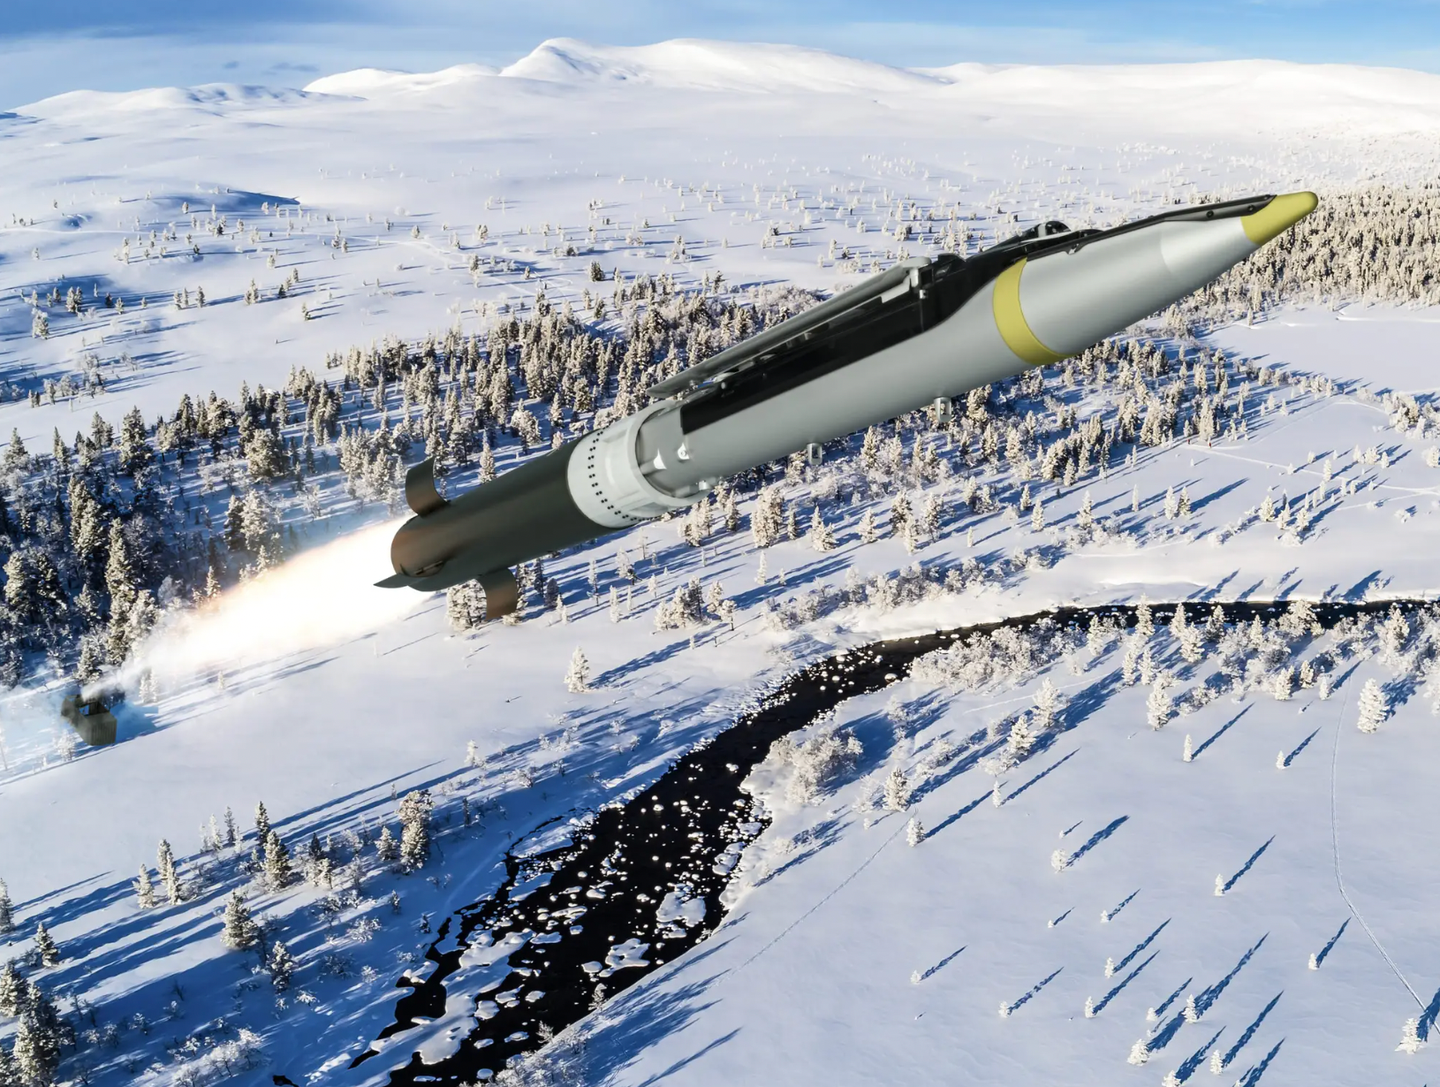 The GLSDB is propelled by its M26 rocket motor before the pop-out wings deploy for the final unpowered run-in to the target.&nbsp;<em>Saab</em>